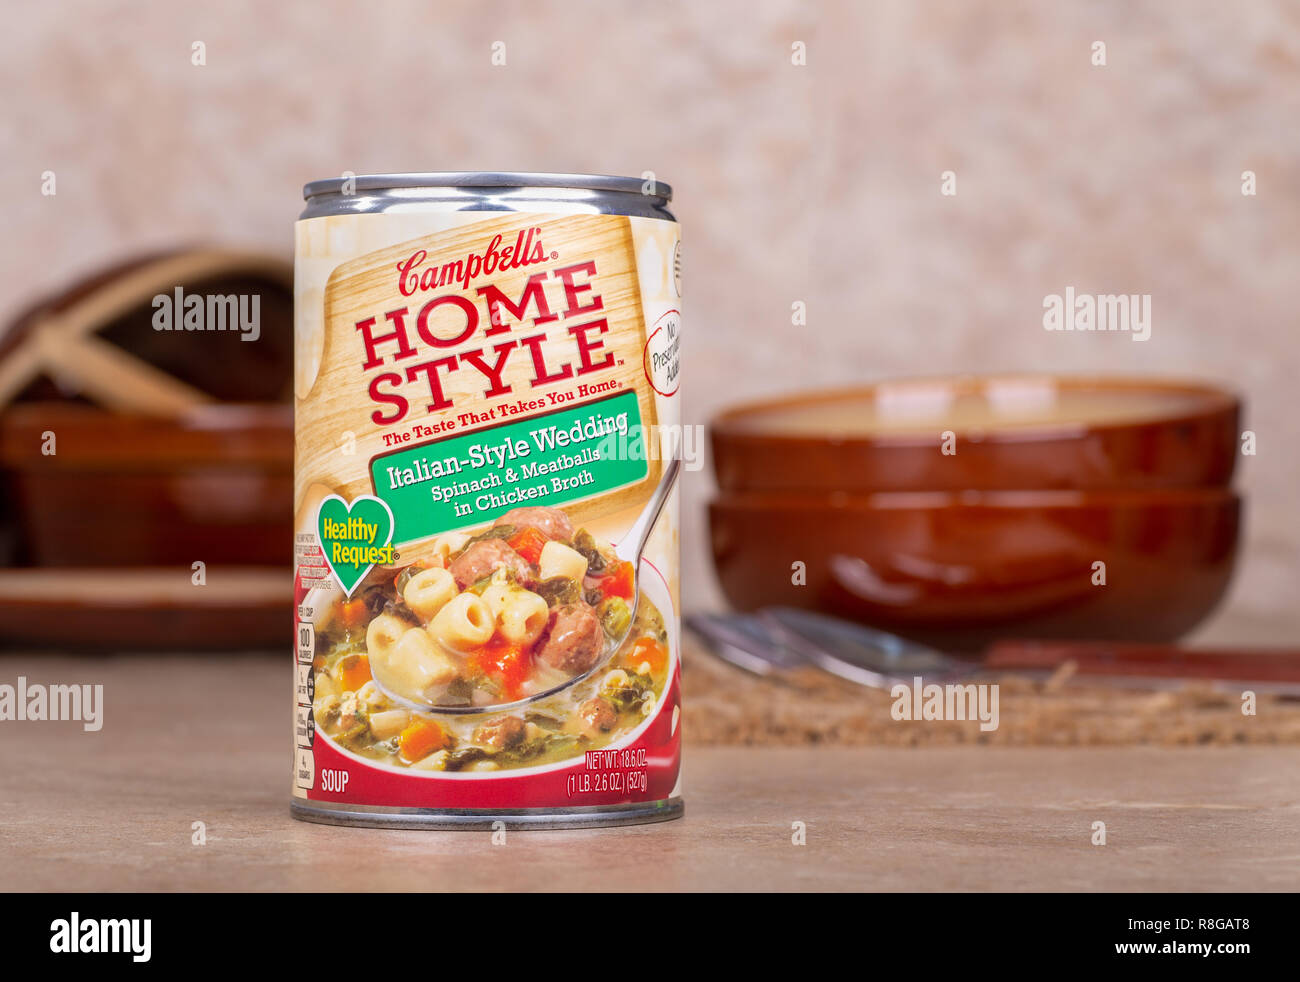 DECEMBER 14, 2018: Closeup of a can of Campbells Home Style Italian-Style Wedding soup on a kitchen counter Stock Photo